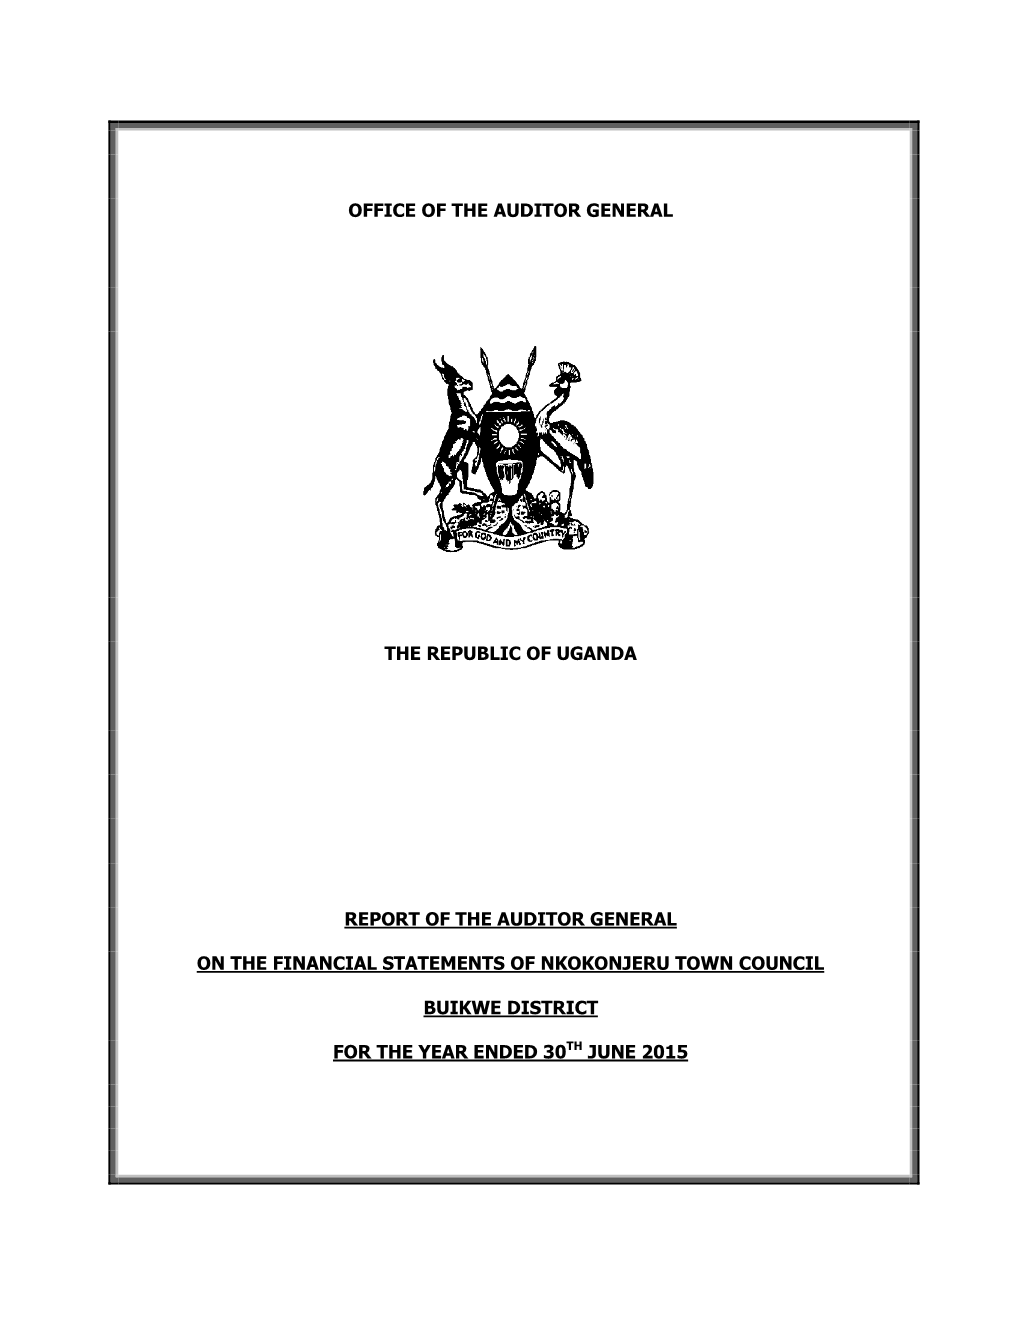 Office of the Auditor General the Republic of Uganda Report of the Auditor General on the Financial Statements of Nkokonjeru